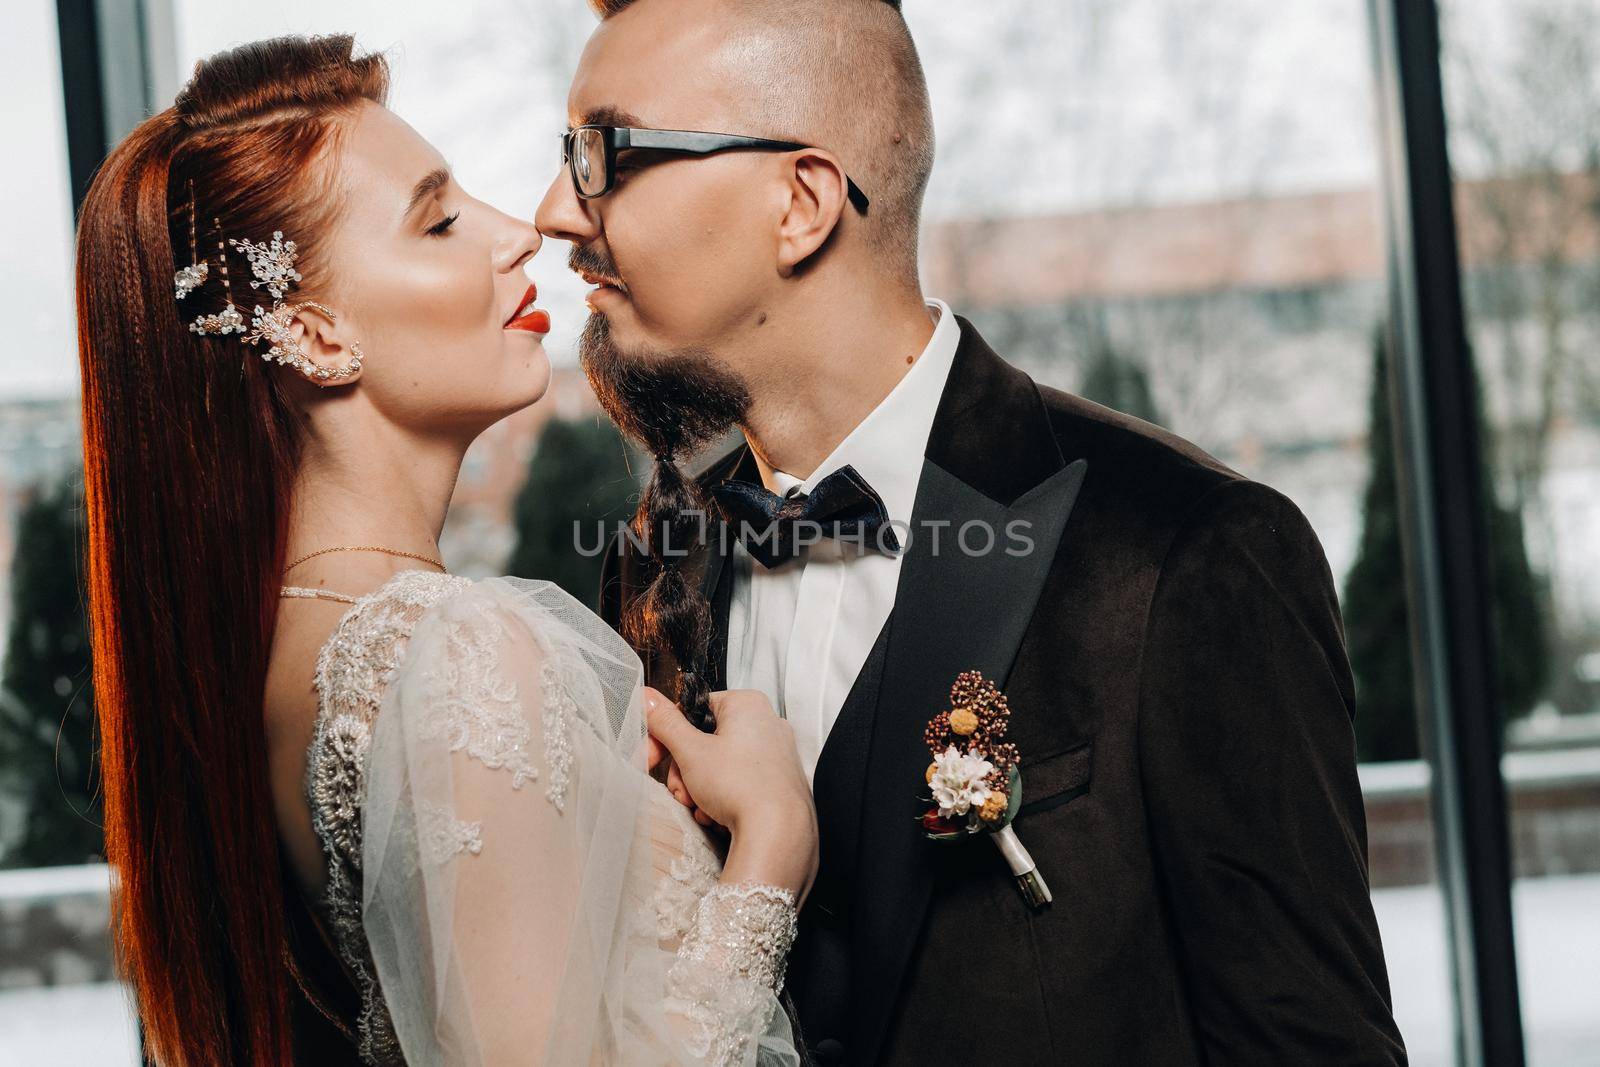 Stylish wedding couple in the interior. Glamorous bride and groom by Lobachad